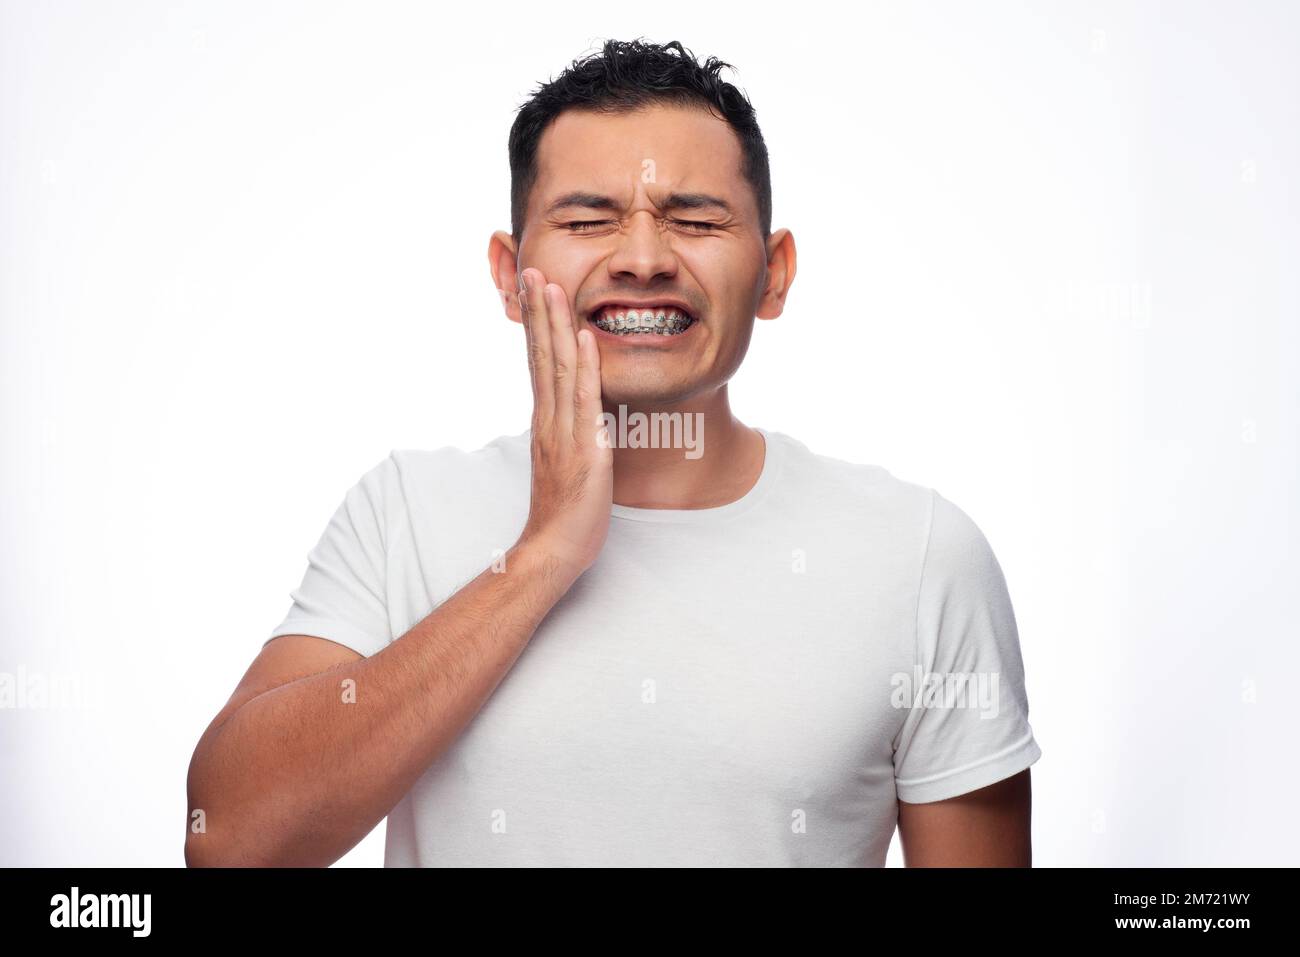 Hispanic man in white shirt and braces grimaces in pain on his face and holds his face by his orthodontic treatment brackets, one person Stock Photo